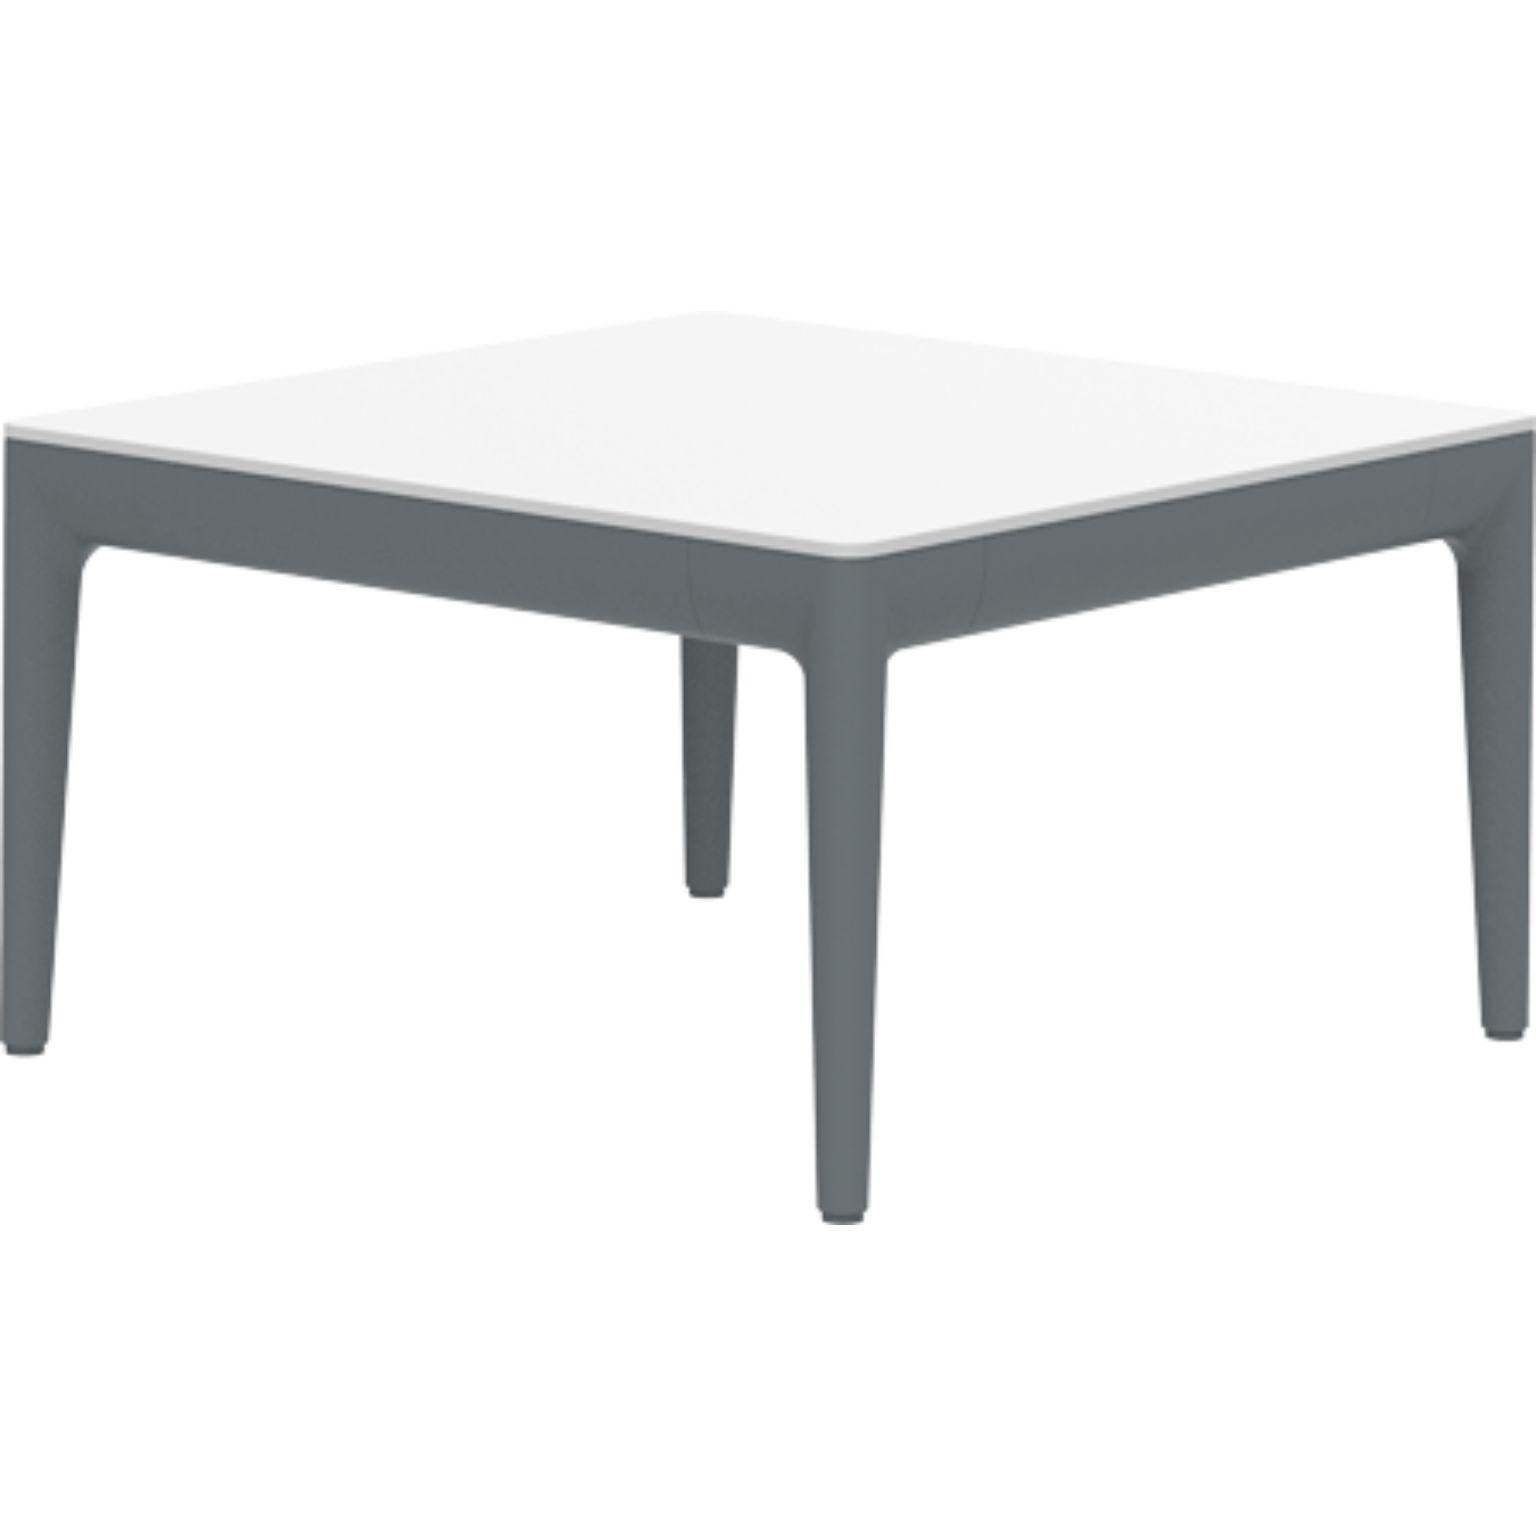 Ribbons grey coffee table 50 by MOWEE
Dimensions: D 50 x W 50 x H 29 cm
Material: Aluminum and HPL top.
Weight: 8 kg.
Also available in different colors and finishes. (HPL Black Edge or Neolith top).

An unmistakable collection for its beauty